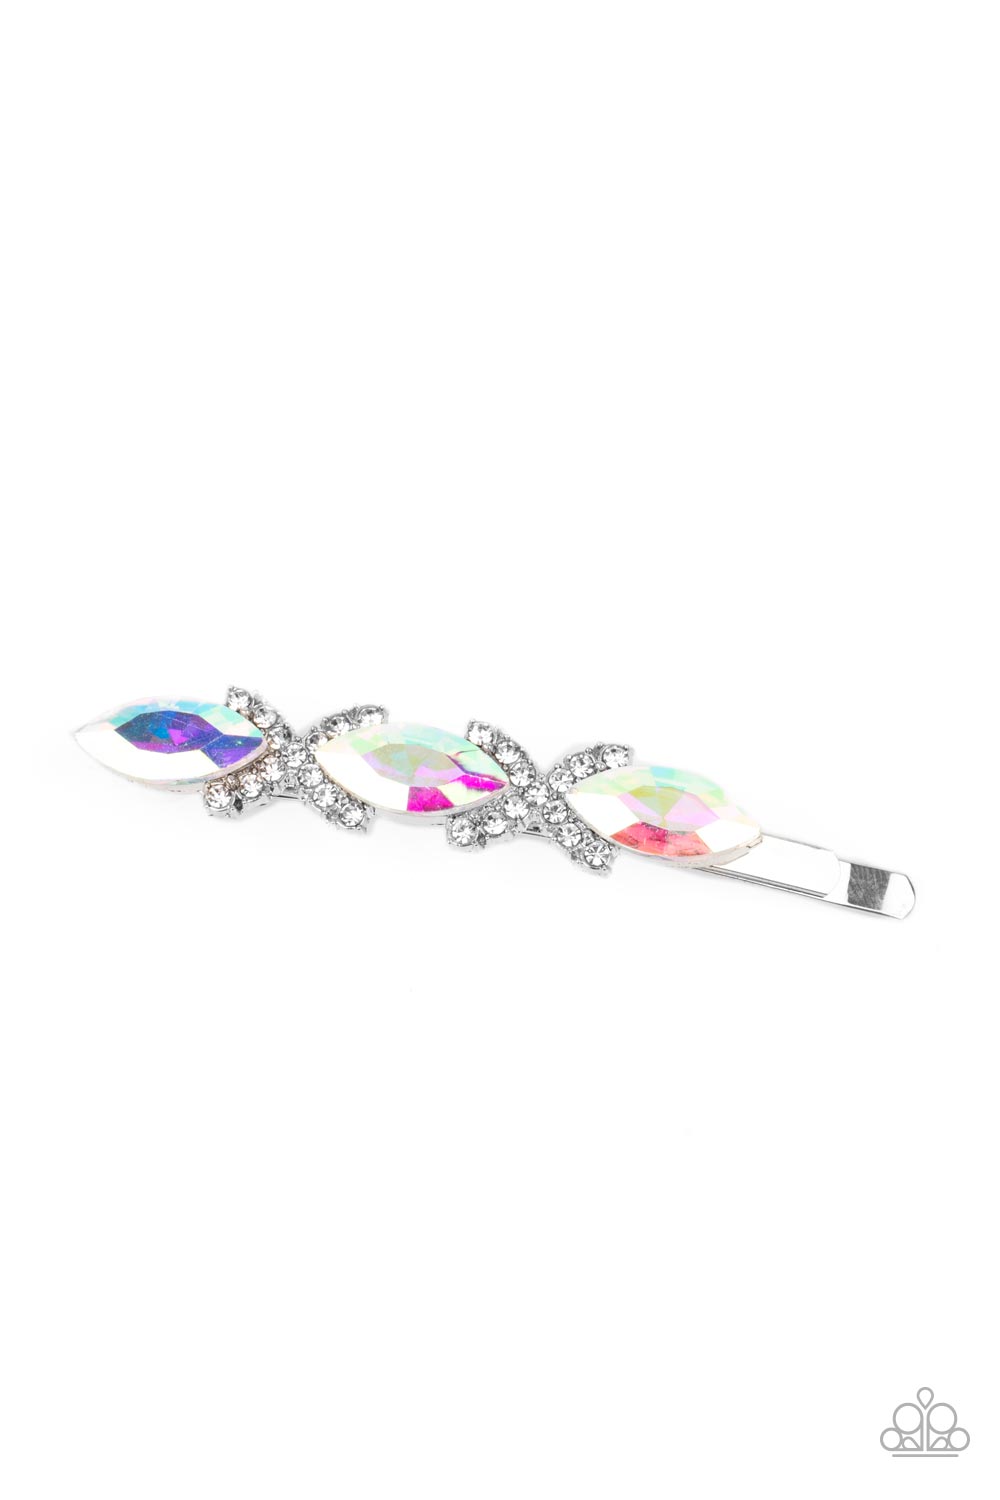 Stellar Socialite Multi Hair Clip - Paparazzi Accessories  Crisscrossed ribbons of glassy white rhinestones separate a trio of shimmery UV marquise cut gems across the front of a classic silver bobby pin for a stellar fashion.  Sold as one individual decorative bobby pin.